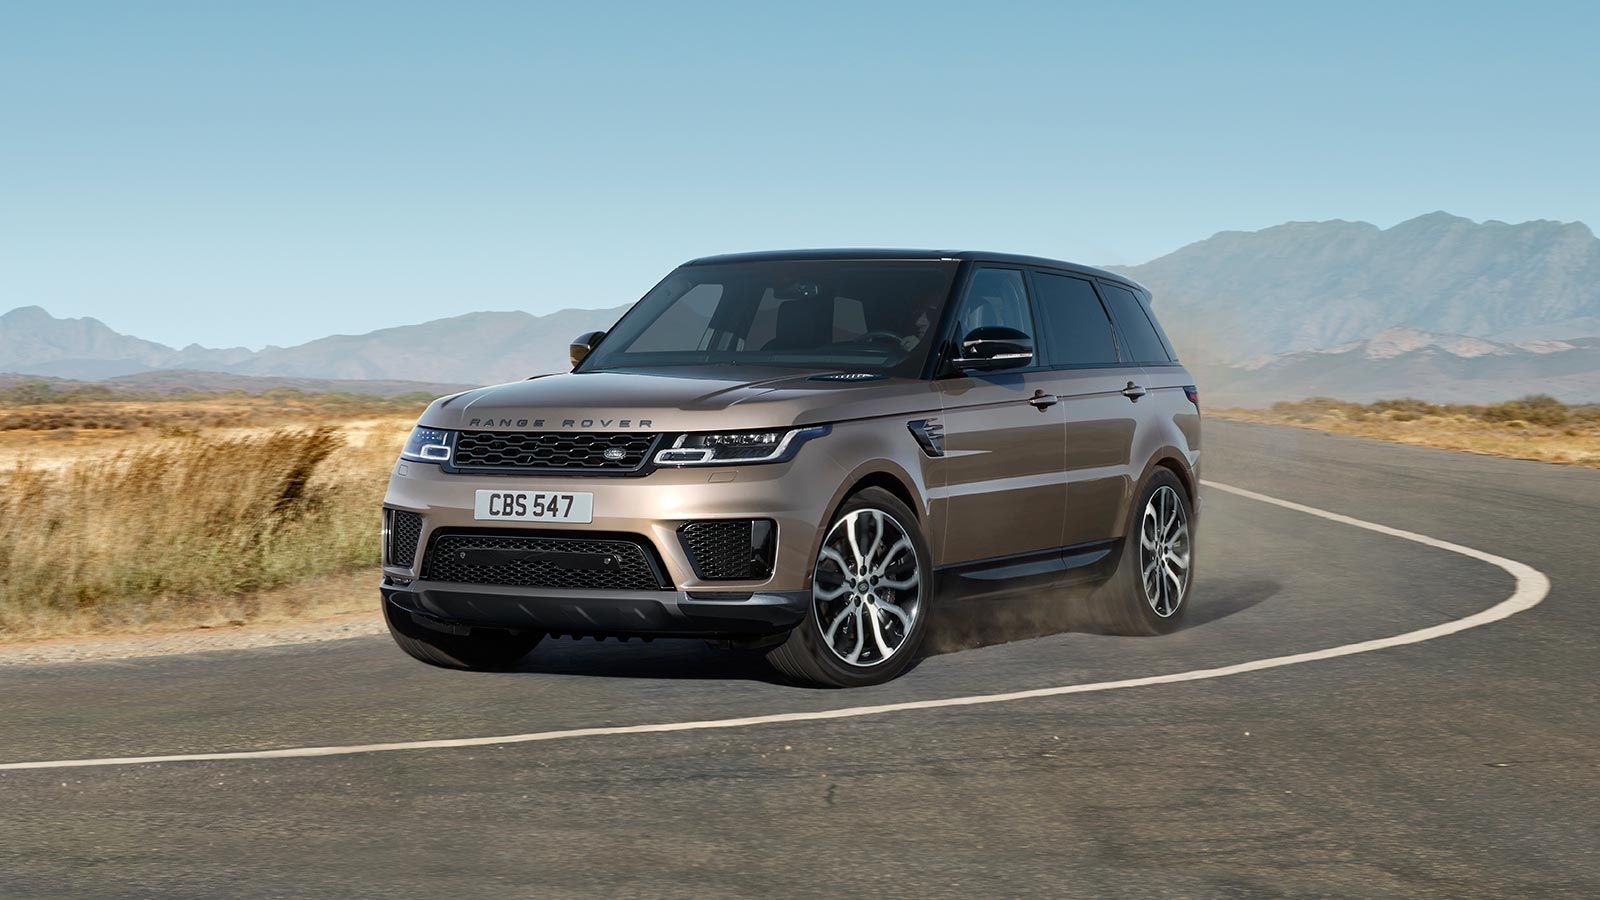 The HSE trim of the 2022 Range Rover Sport.